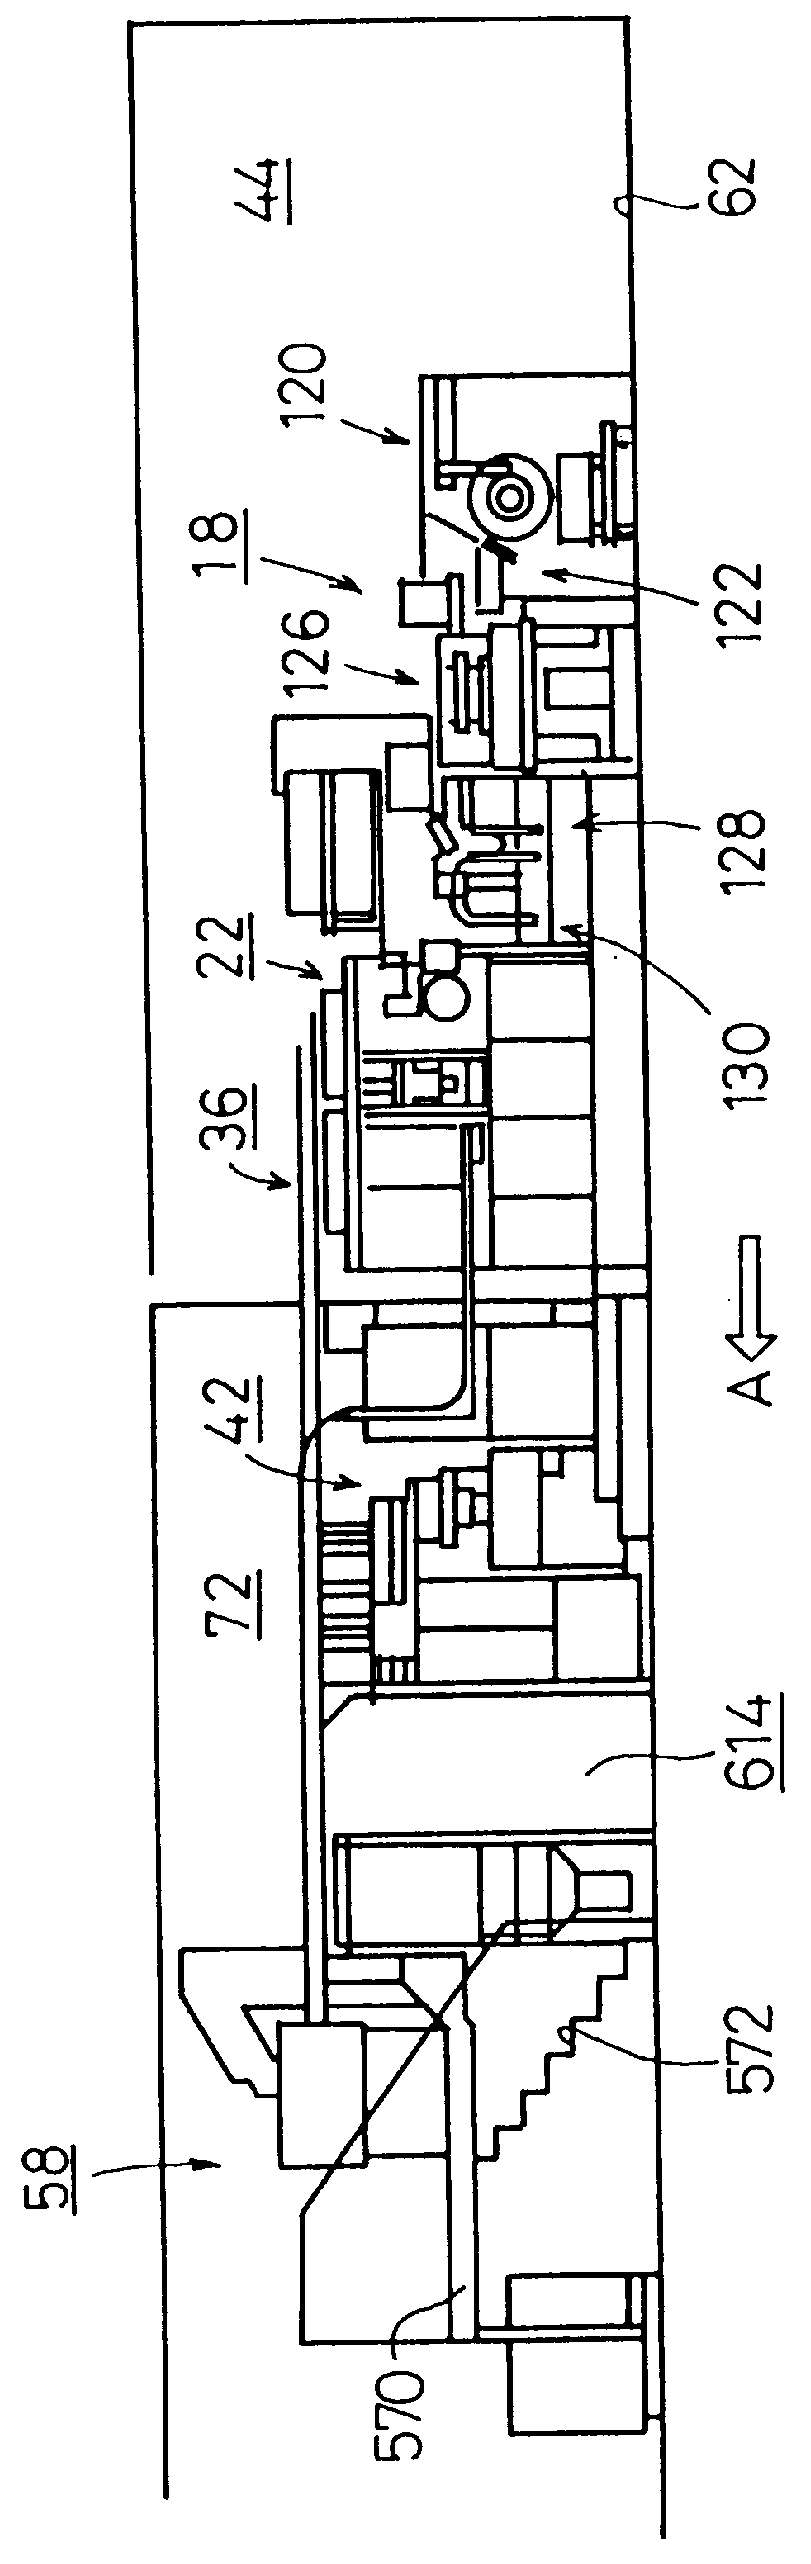 Apparatus for processing and packaging photographic film, mechanism for and method of feeding resin components